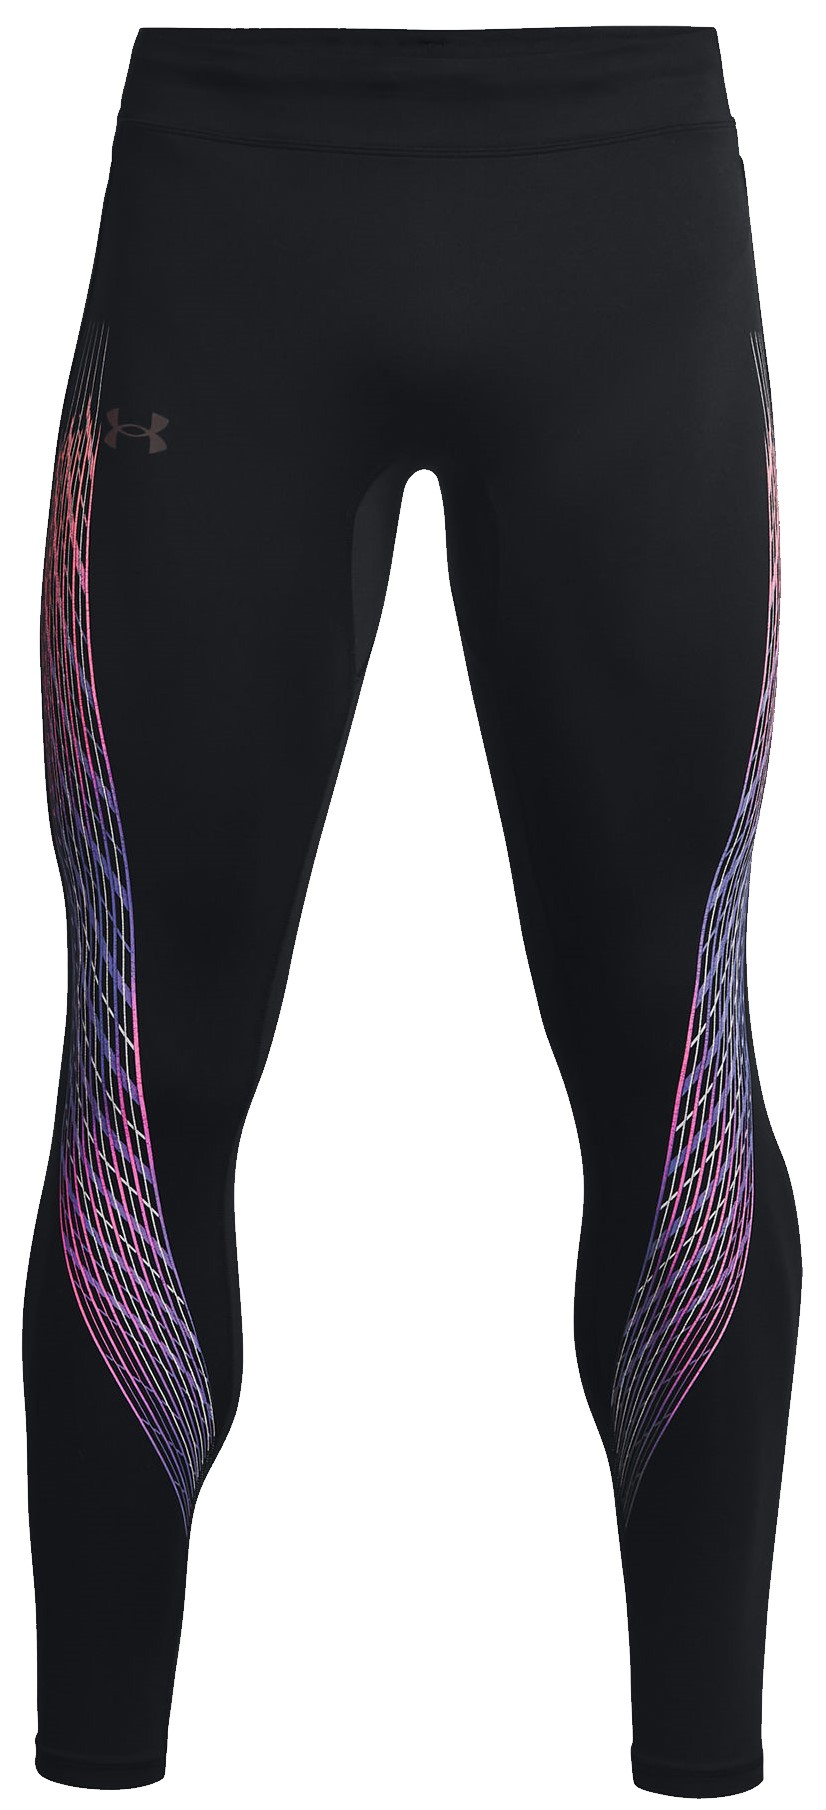 https://i1.t4s.cz/products/1365674-001/under-armour-ua-rush-stamina-tight-blk-478076-1365674-001.jpg